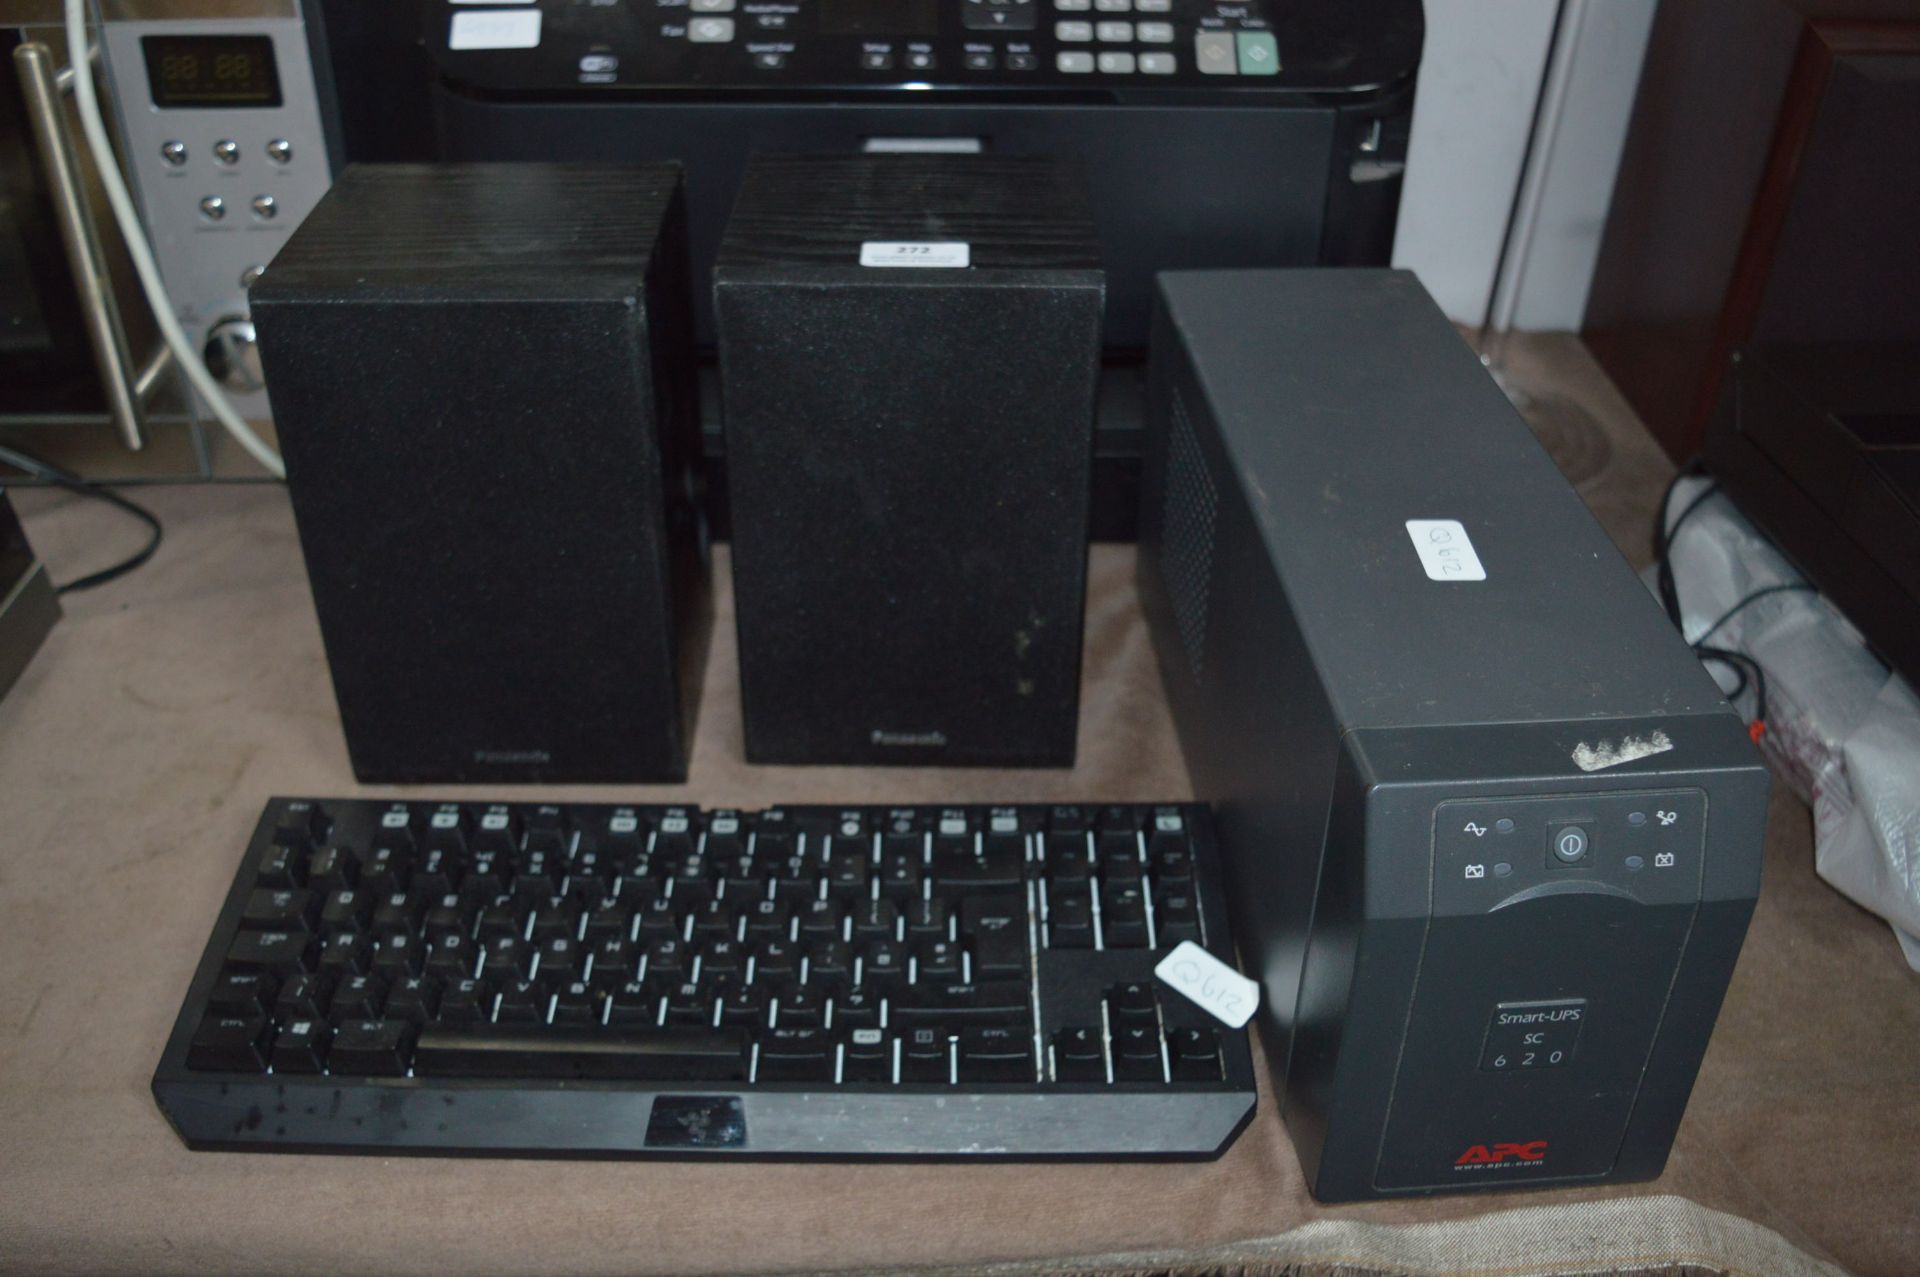 Keyboard, Speakers and APC Smart UPS Device